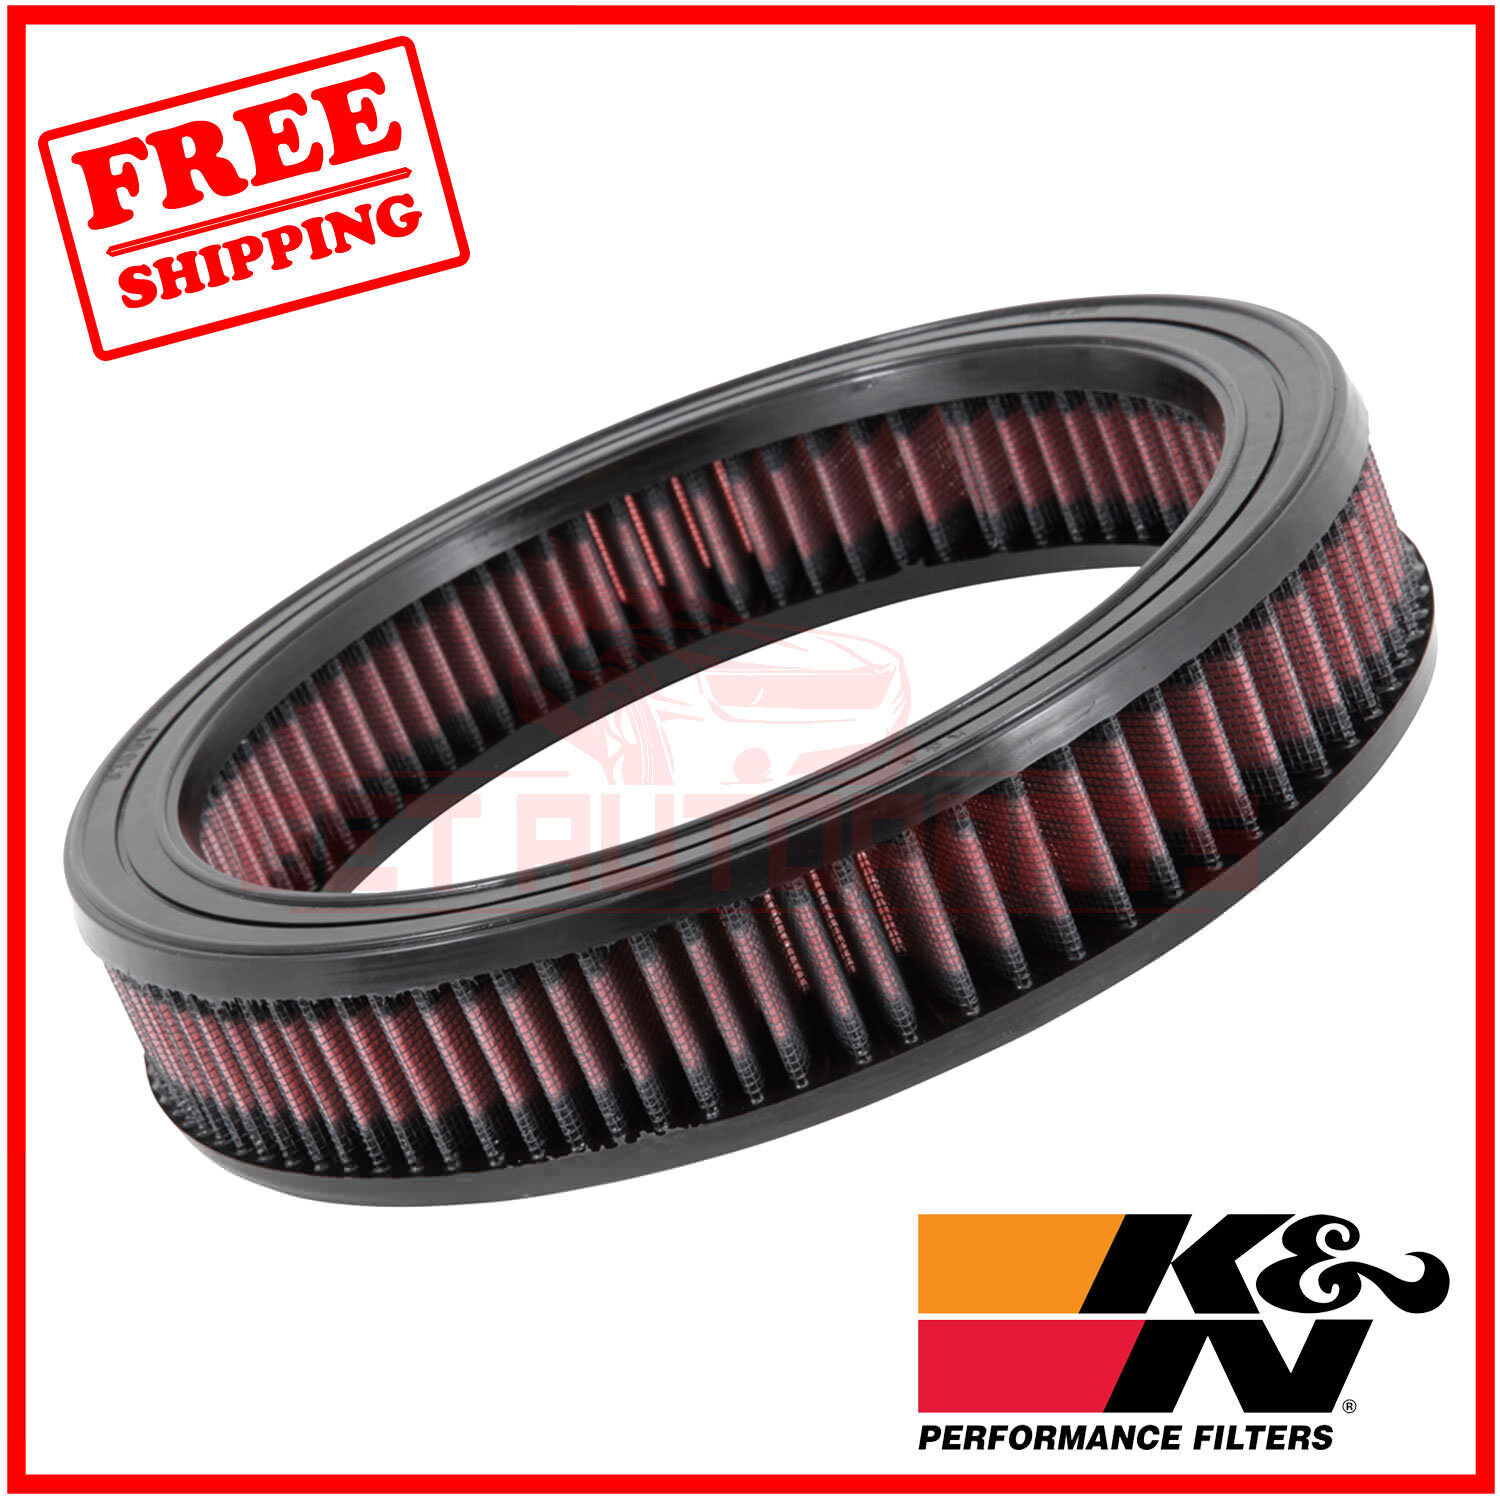 K&N Replacement Air Filter for Pontiac Tempest 1964-1967